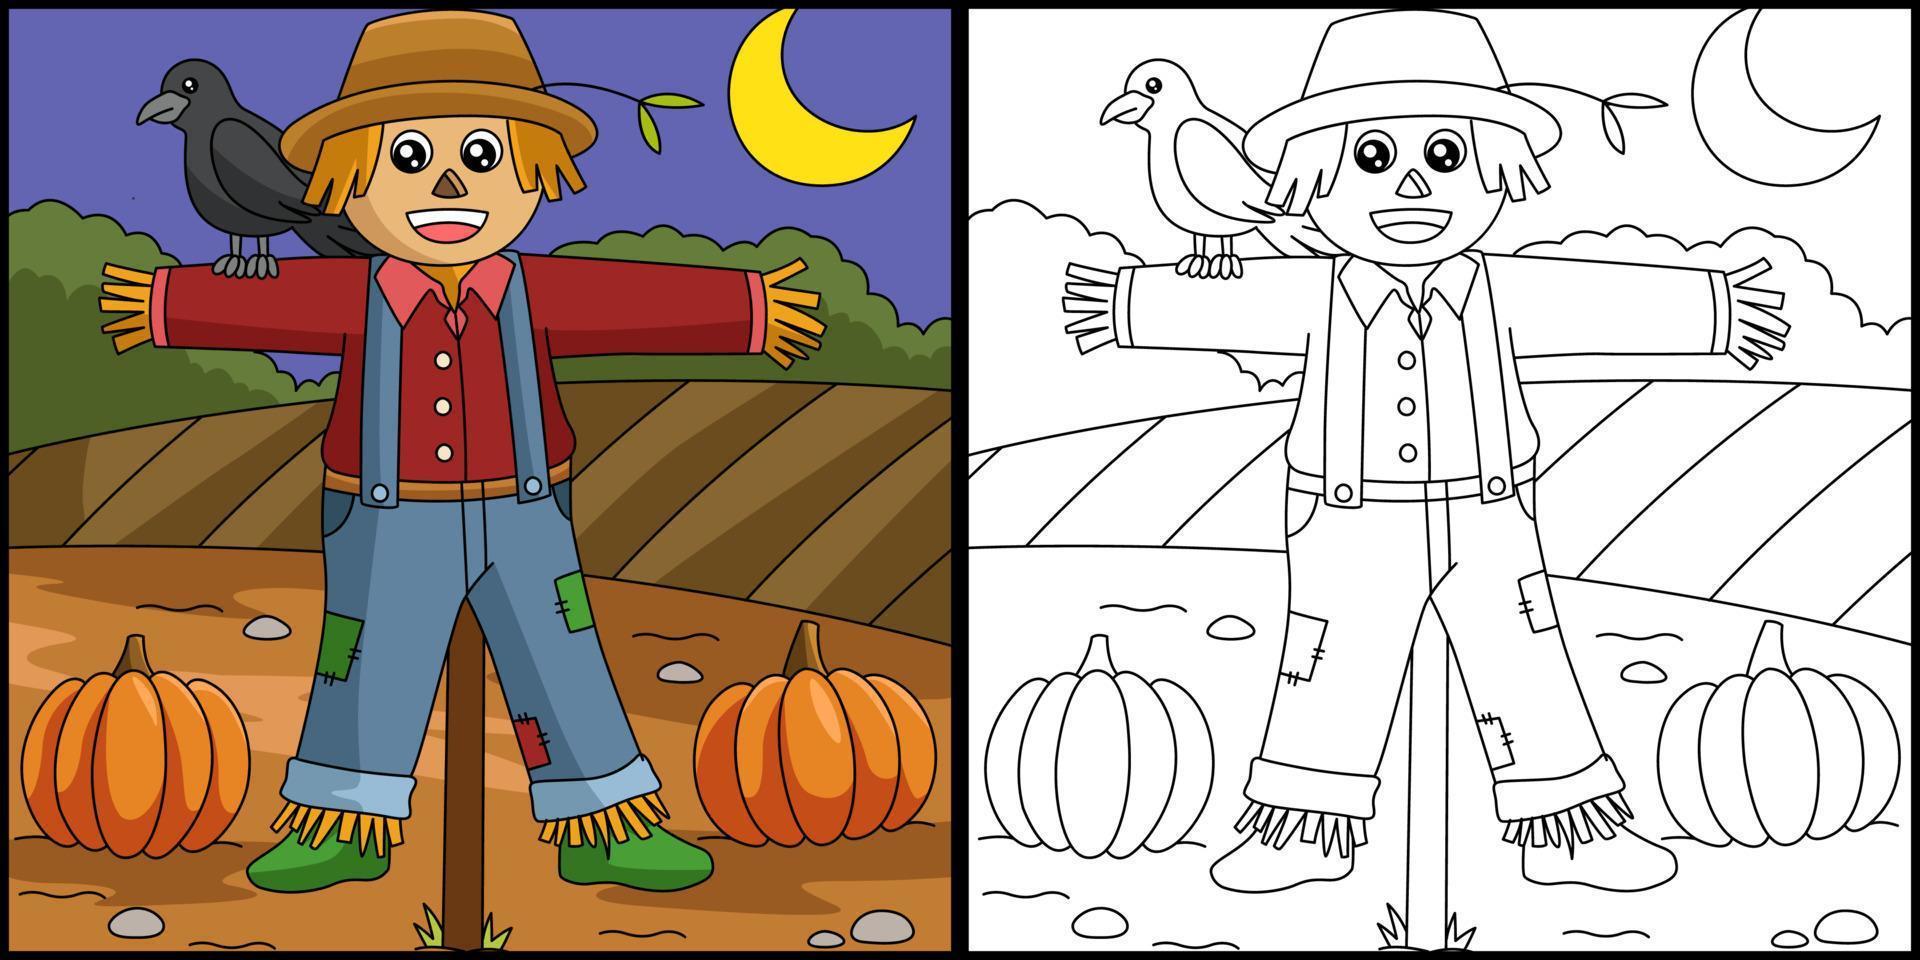 Scarecrow Coloring Page Colored Illustration vector